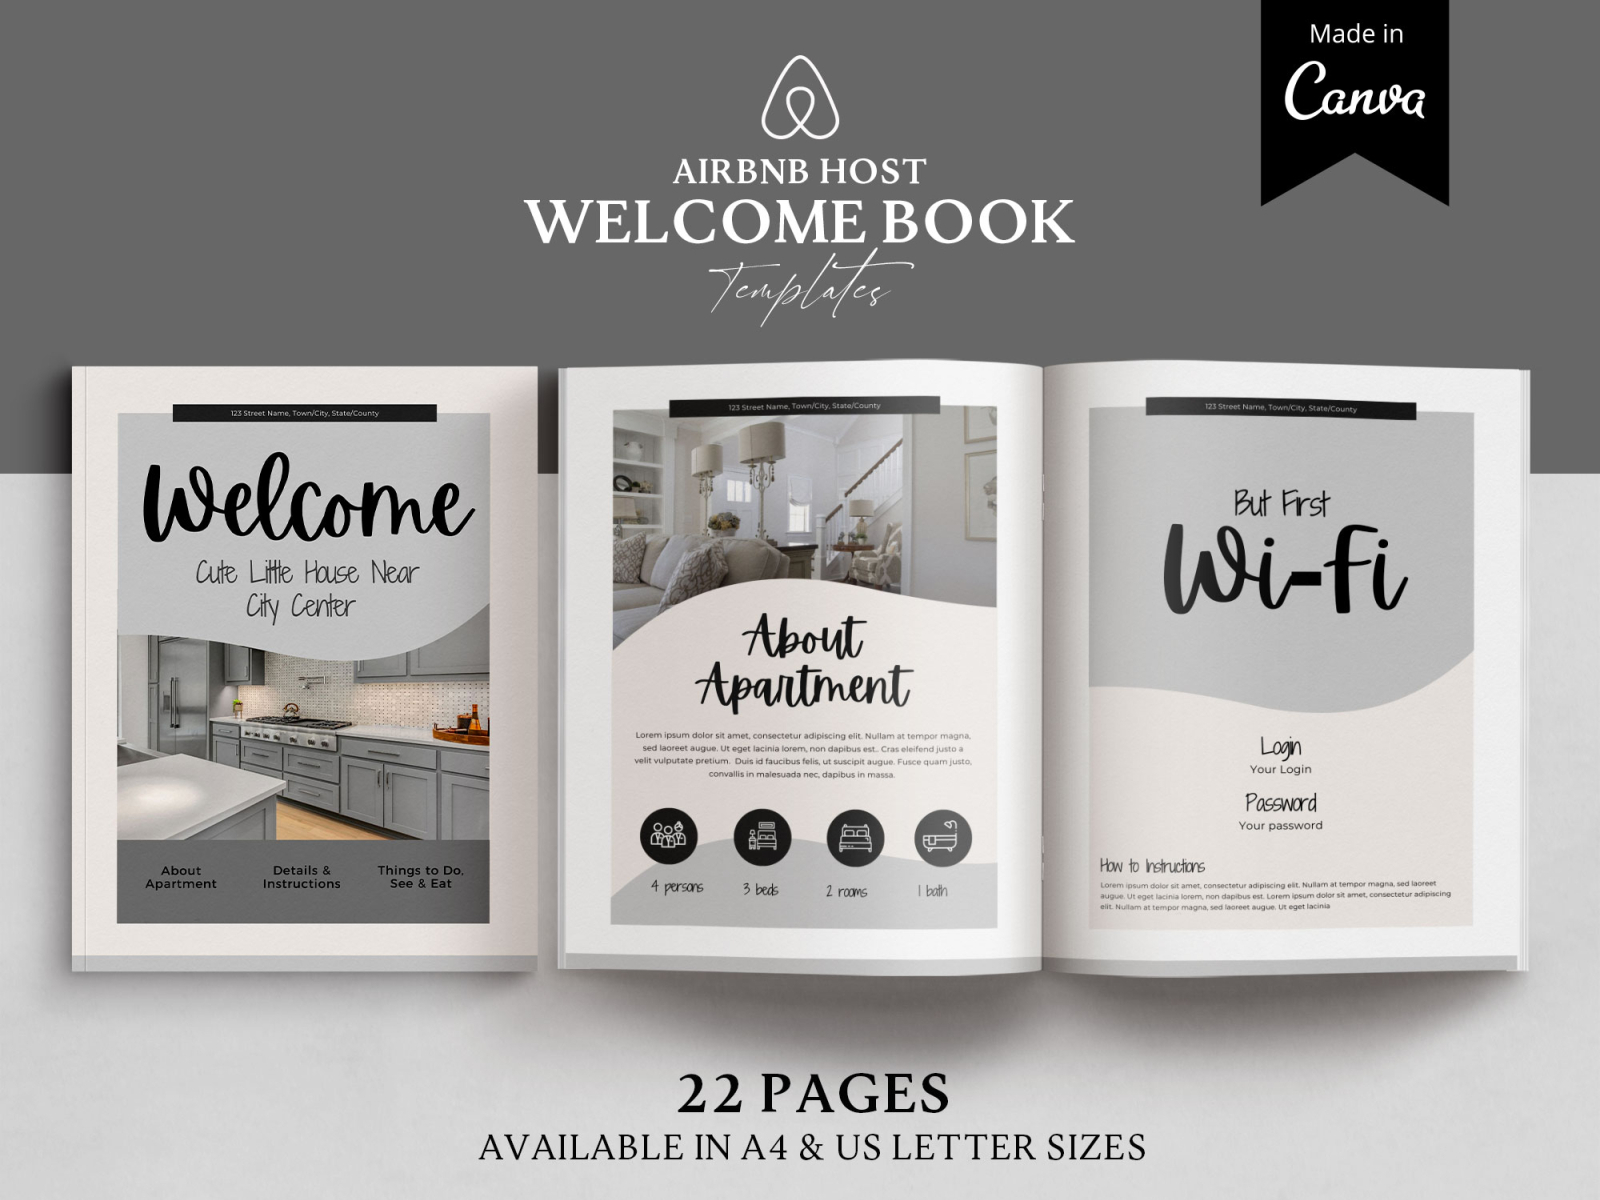 airbnb-guest-book-template-canva-by-ilya-dubynin-on-dribbble